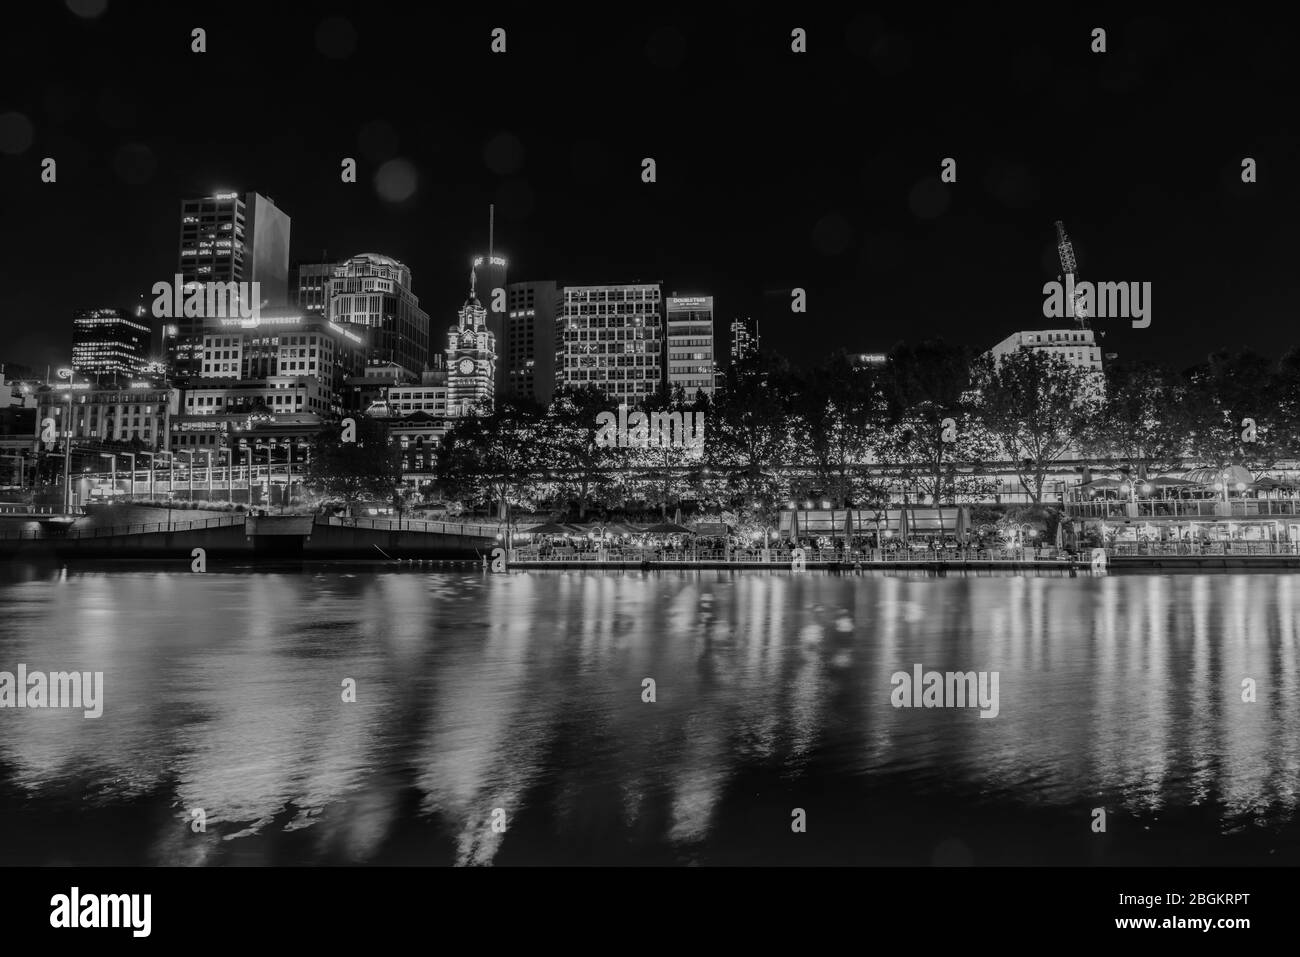 Melbourne Australia - March 9 2020; City at night, buildings, lights and corporate brands neon signs across Yarra River in monochrome. Stock Photo